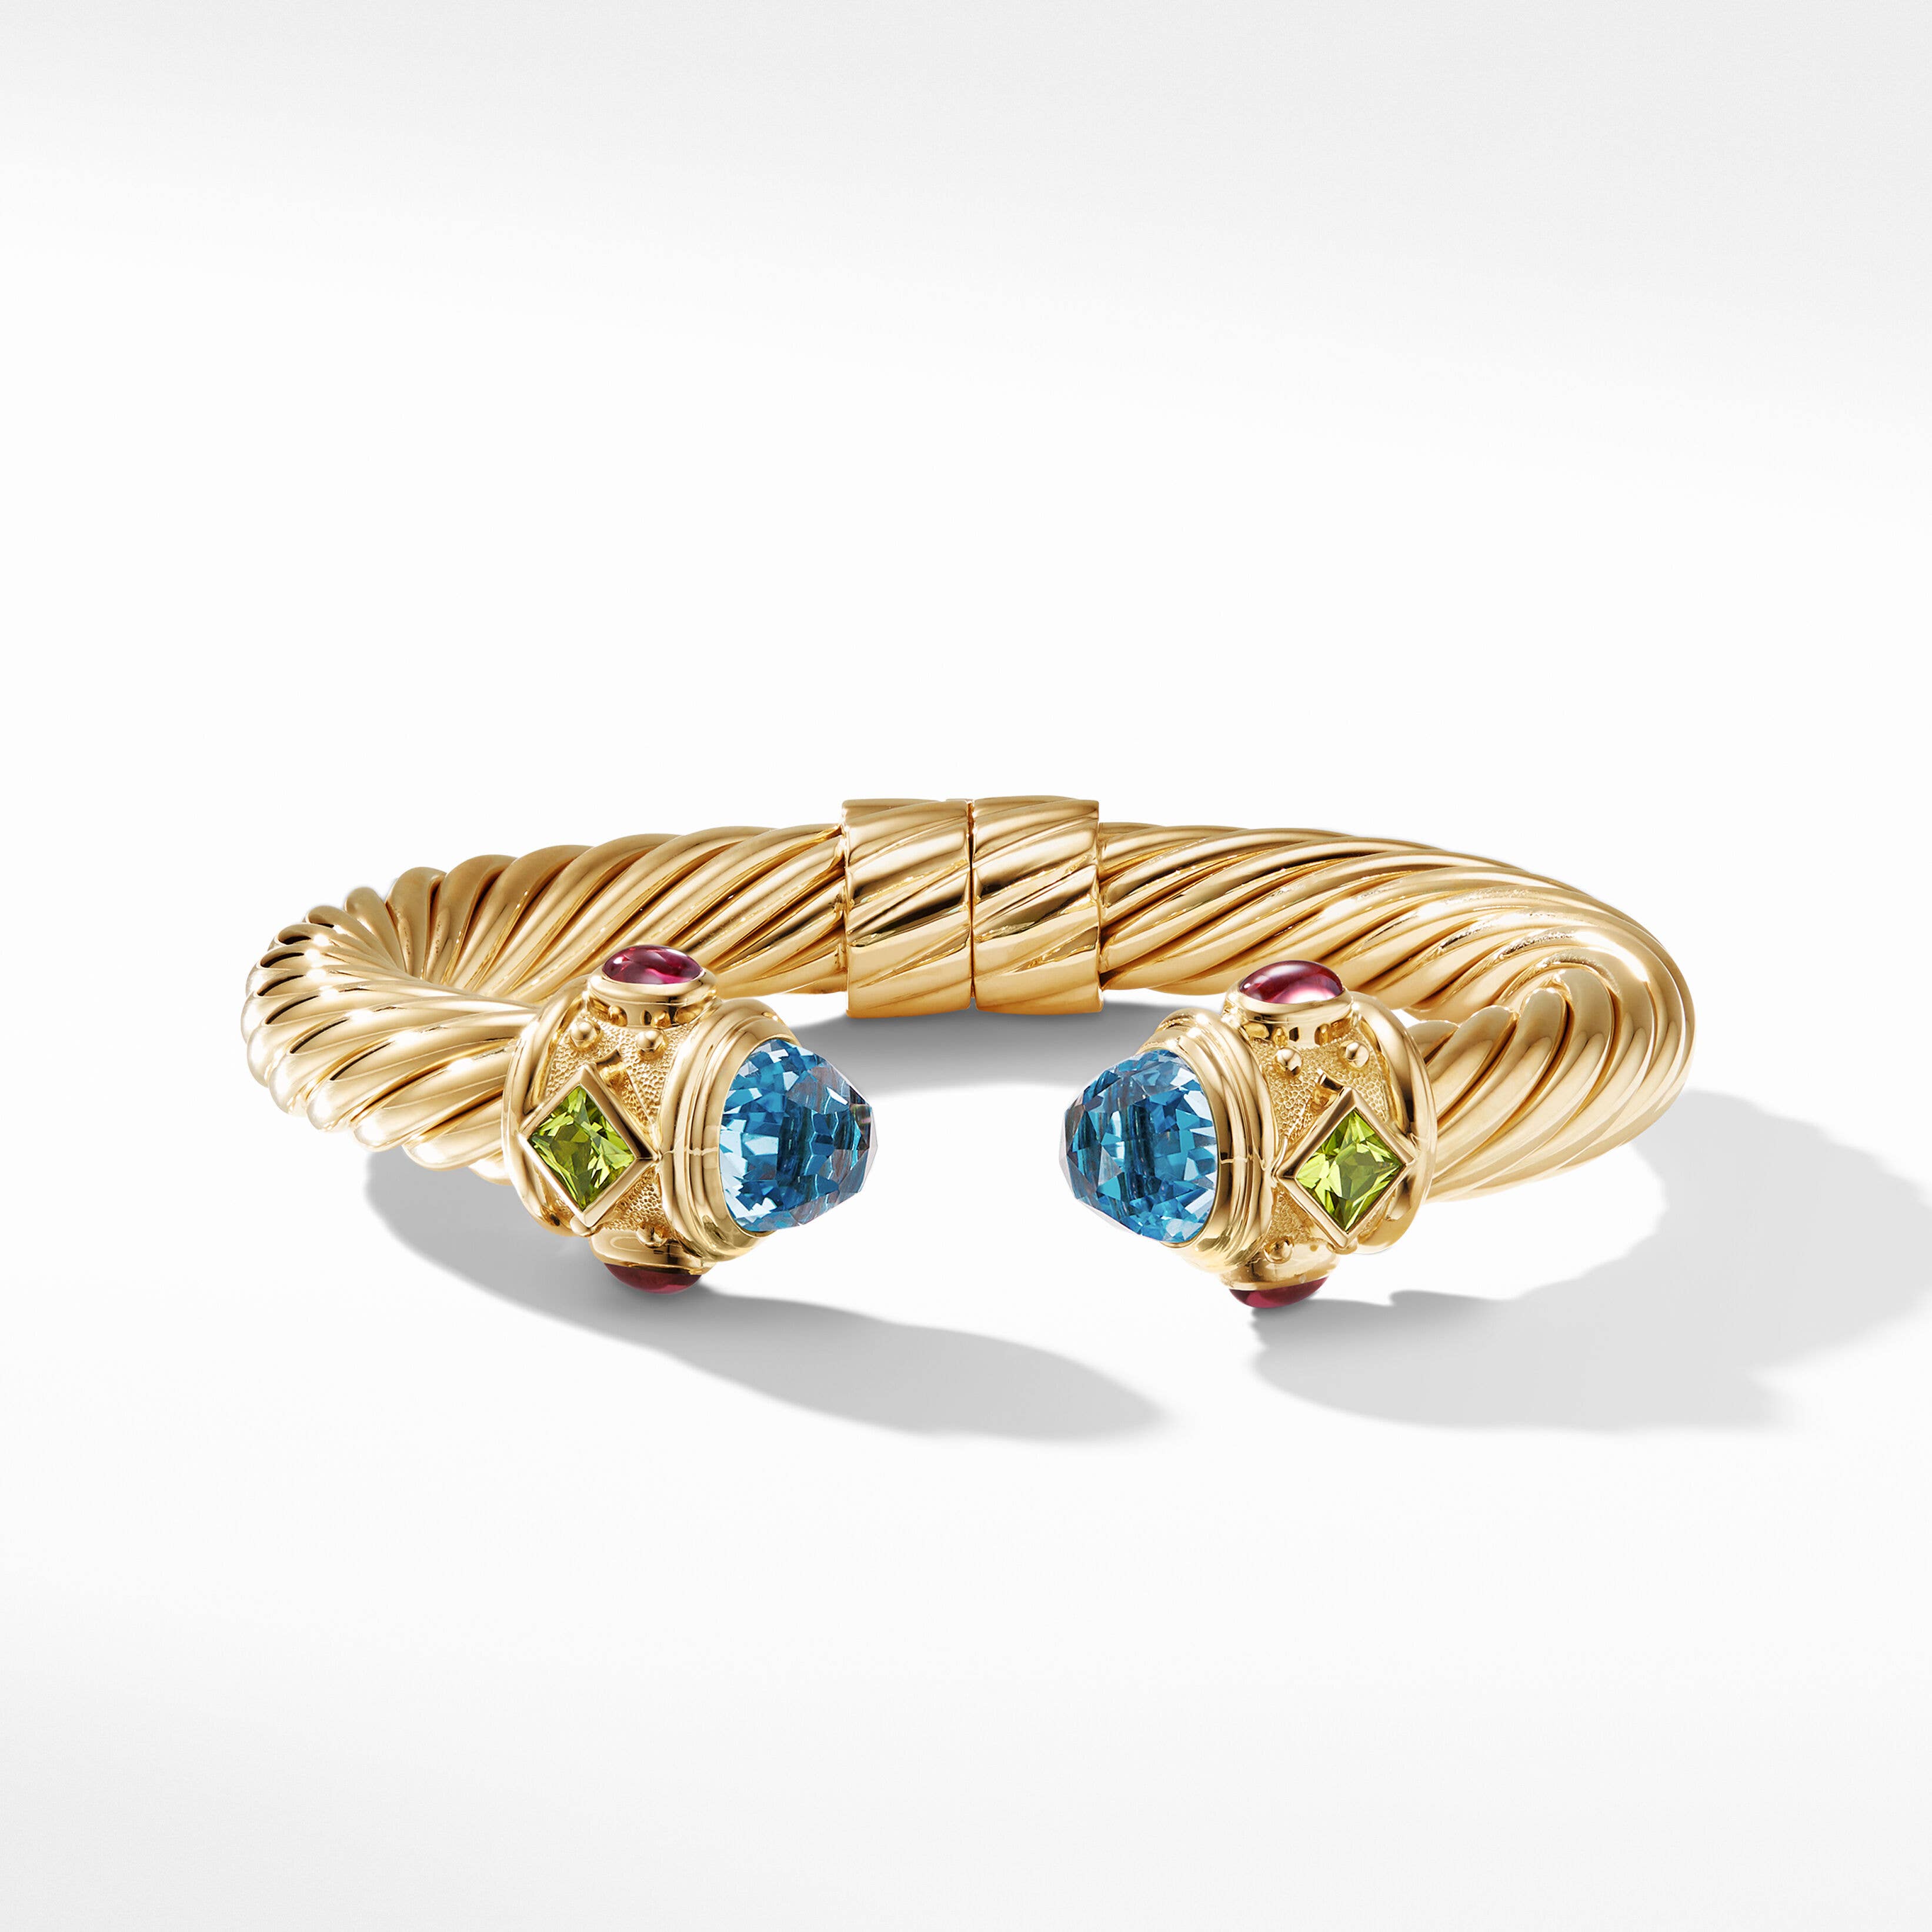 Renaissance® Bracelet in 18K Yellow Gold with Blue Topaz, Peridot and Pink Tourmaline